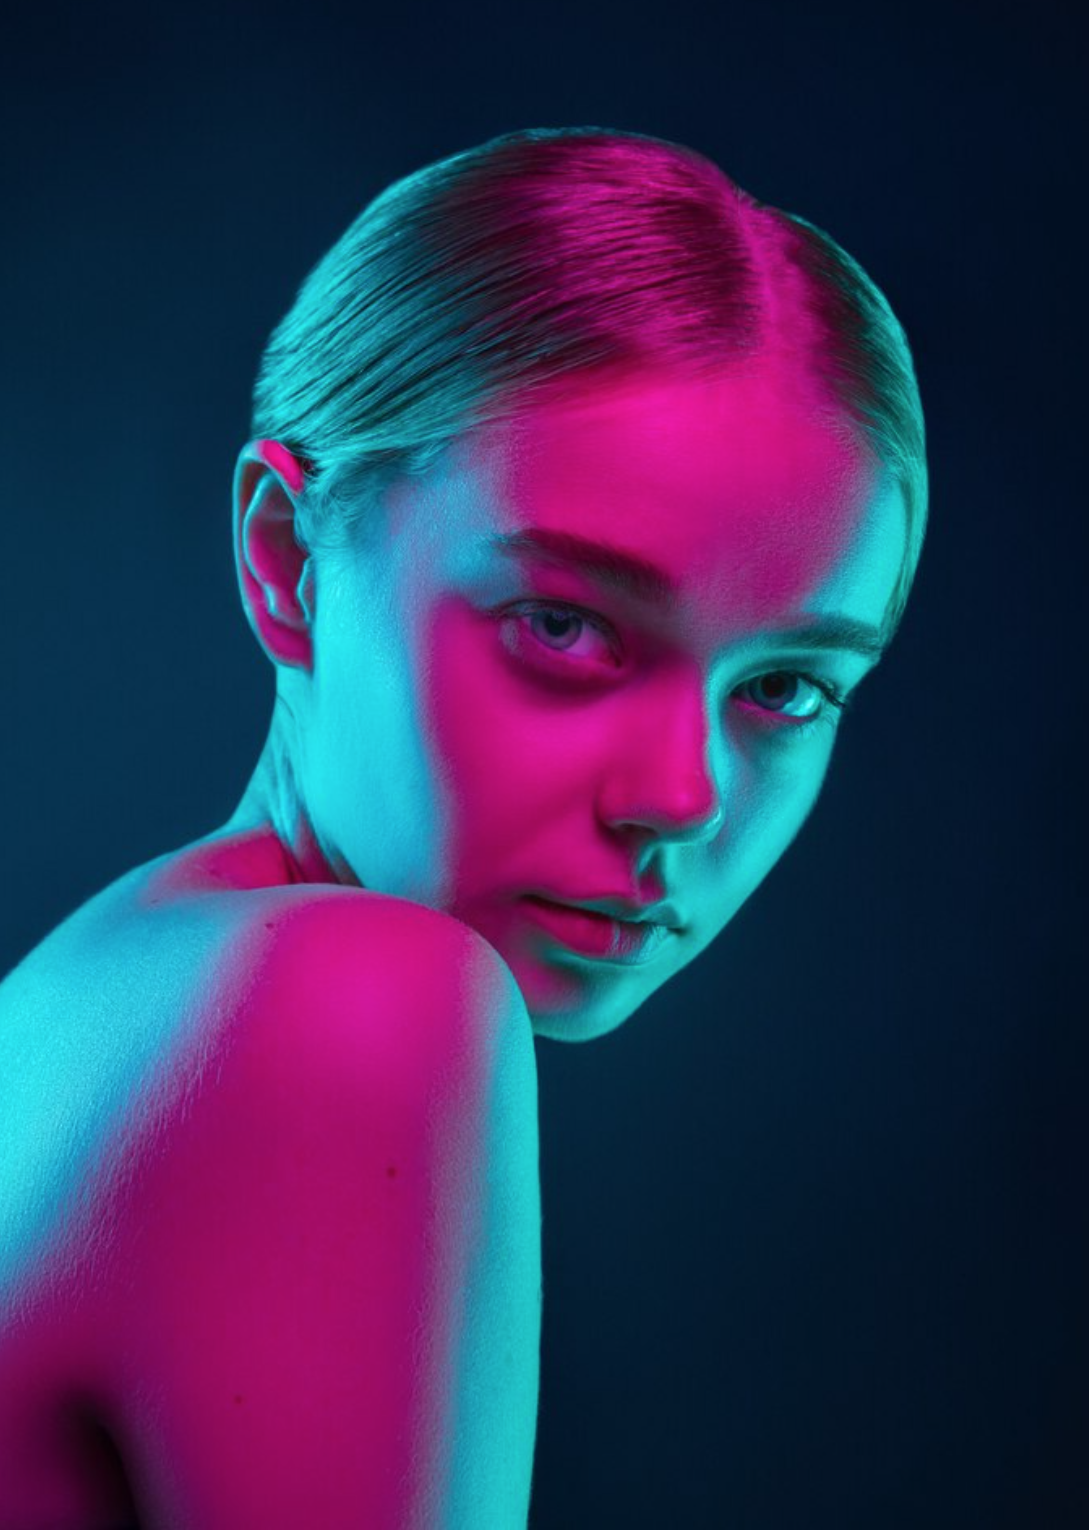 Blue and Red Light on Blonde Girl with a Blue Black background.